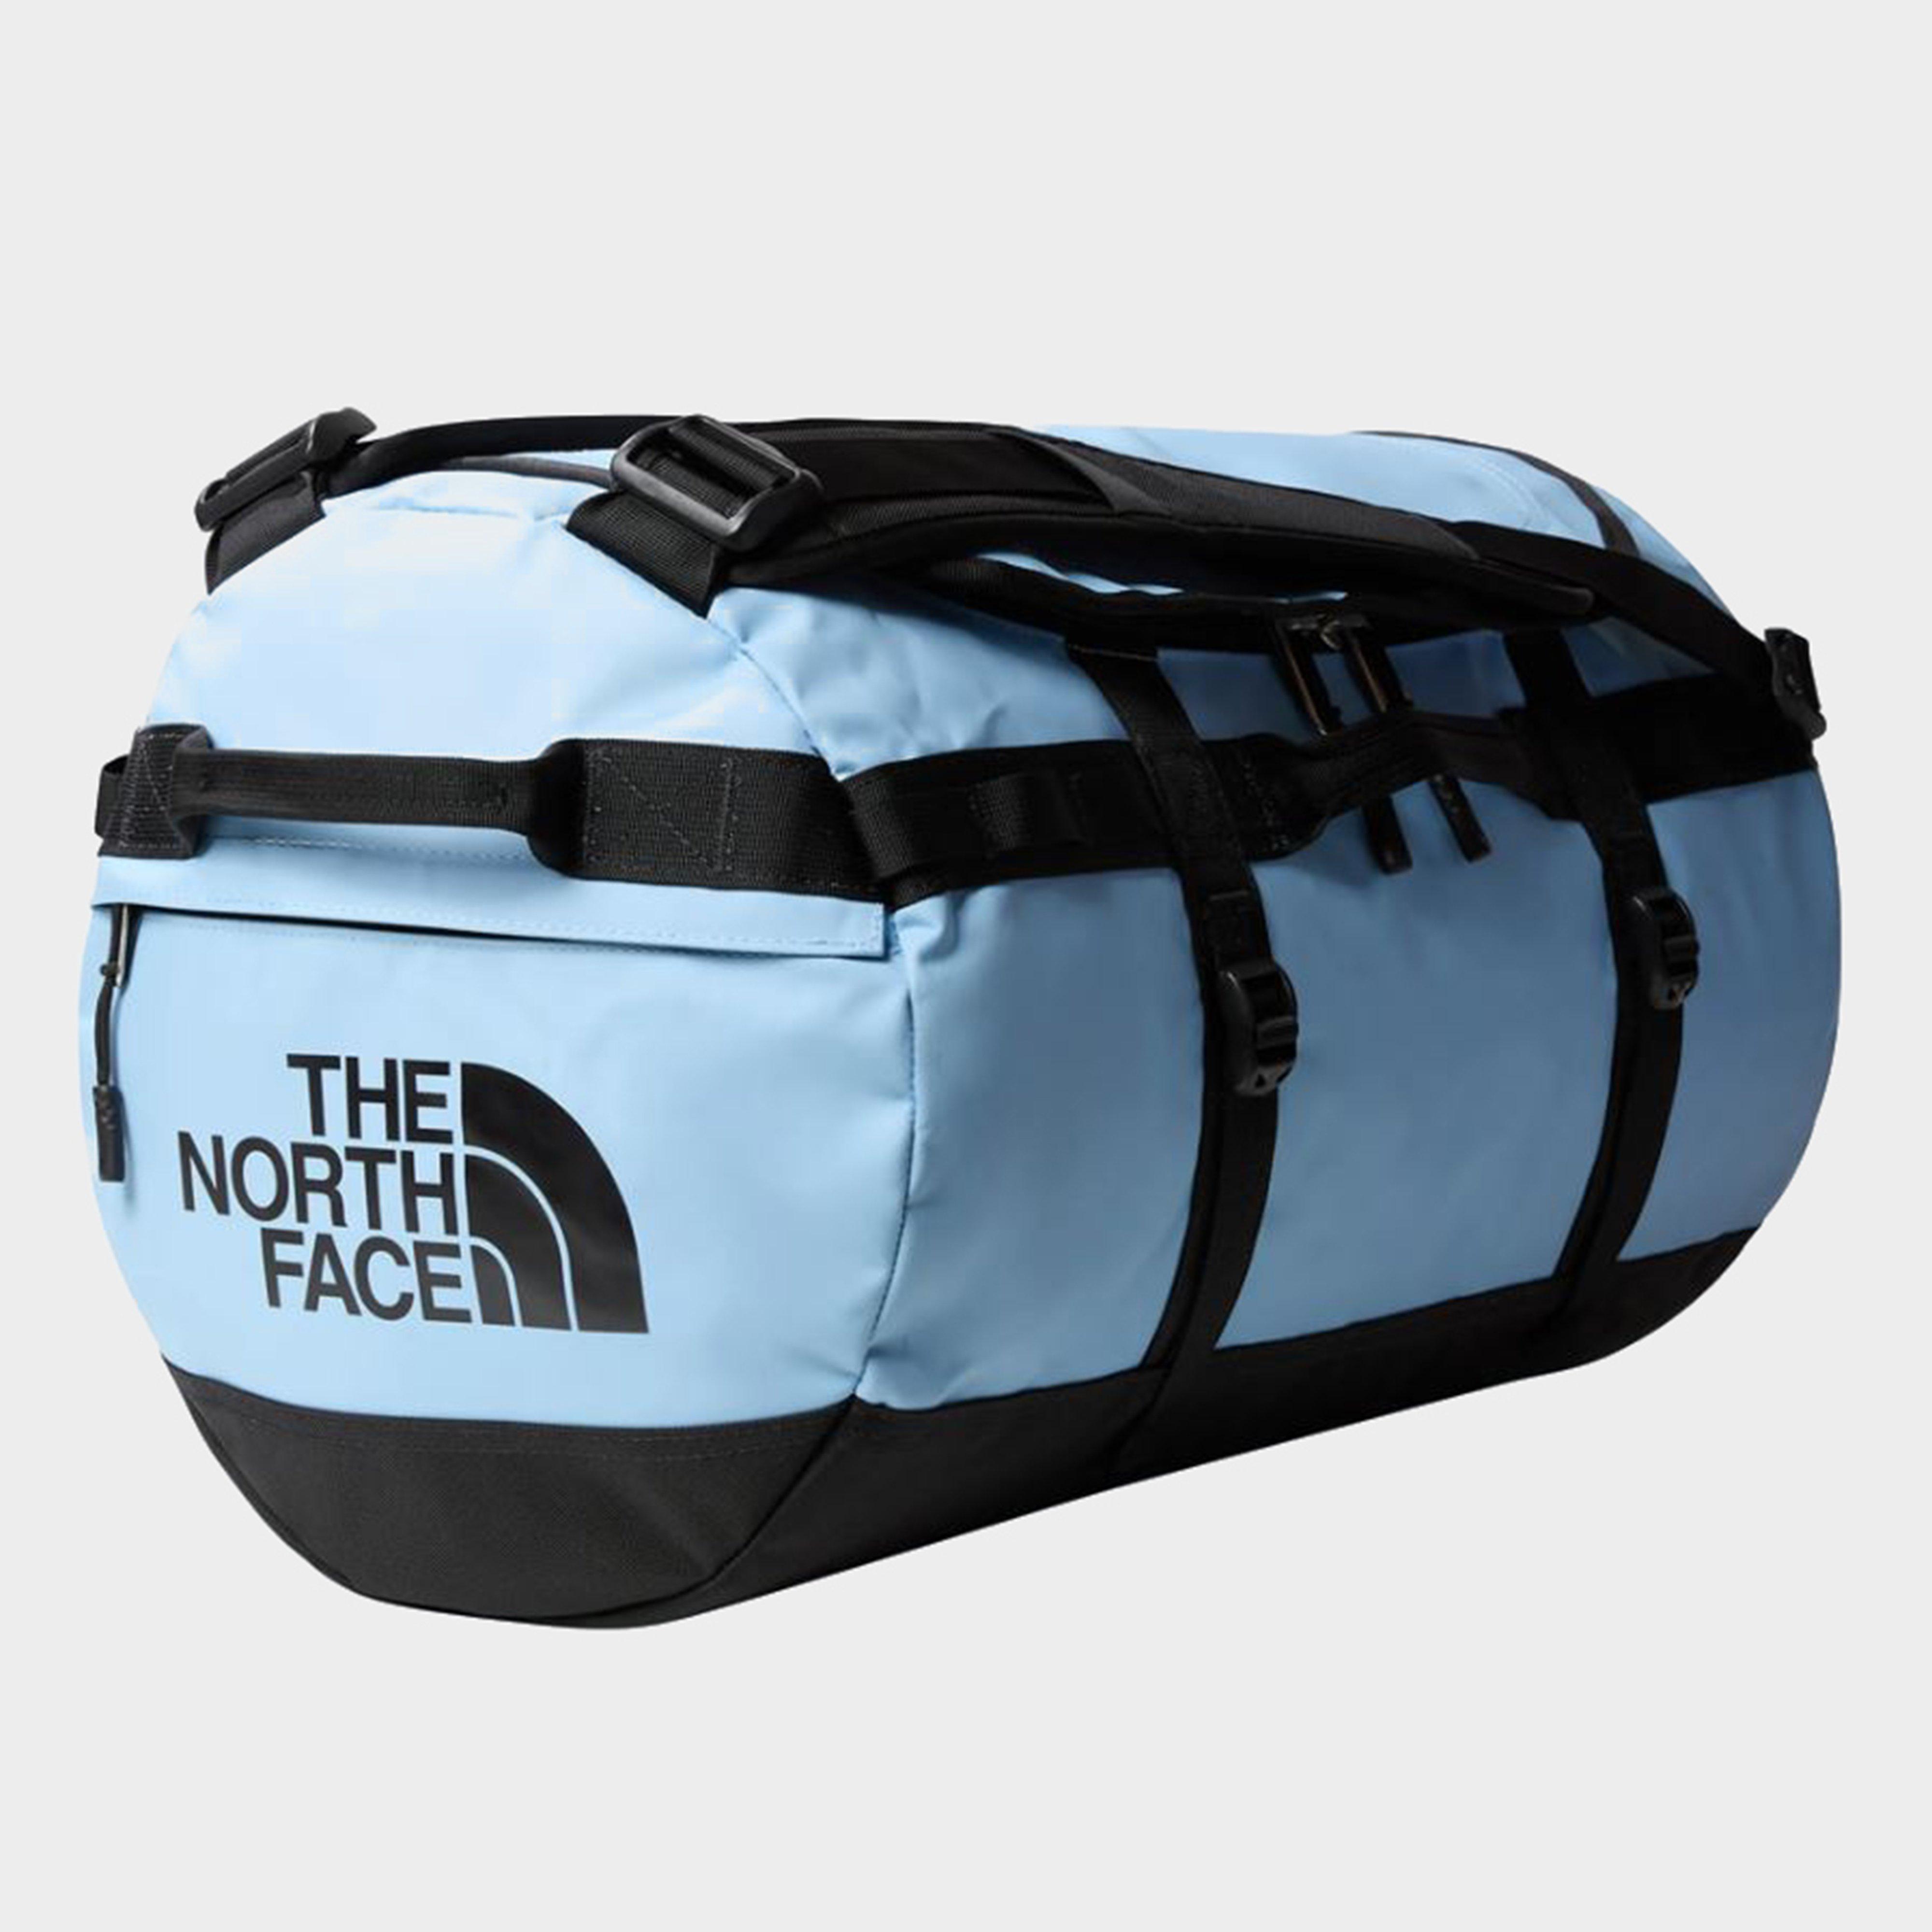  The North Face Basecamp Duffel Bag (Small), Blue